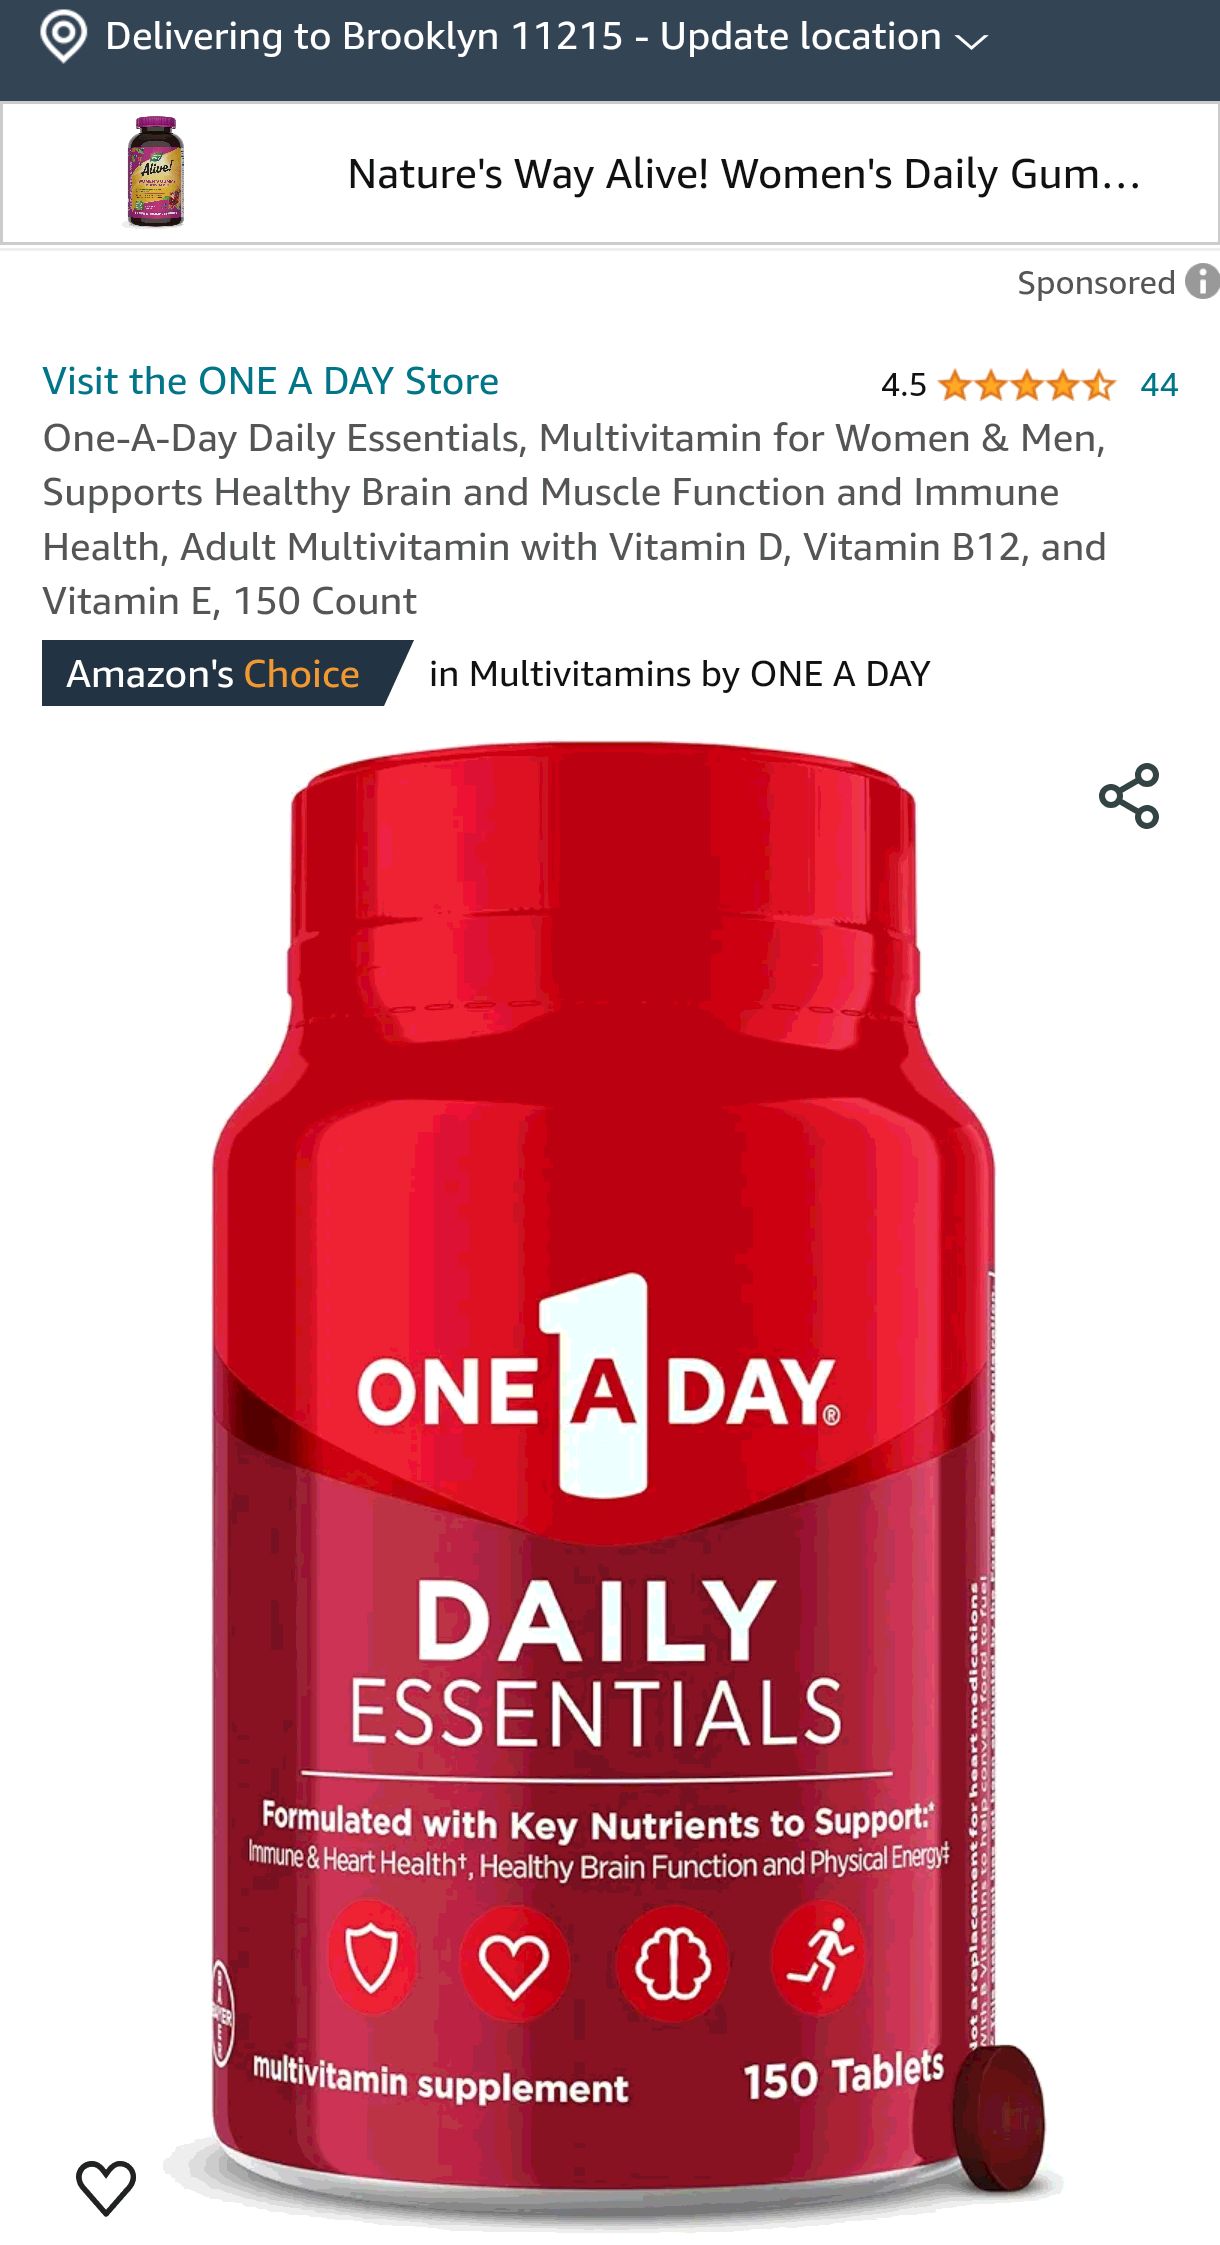 One-A-Day Daily Essentials, Multivitamin for Women & Men, Supports Healthy Brain and Muscle Function and Immune Health, Adult Multivitamin with Vitamin D, Vitamin B12, and Vitamin E, 150 Count​ : Heal